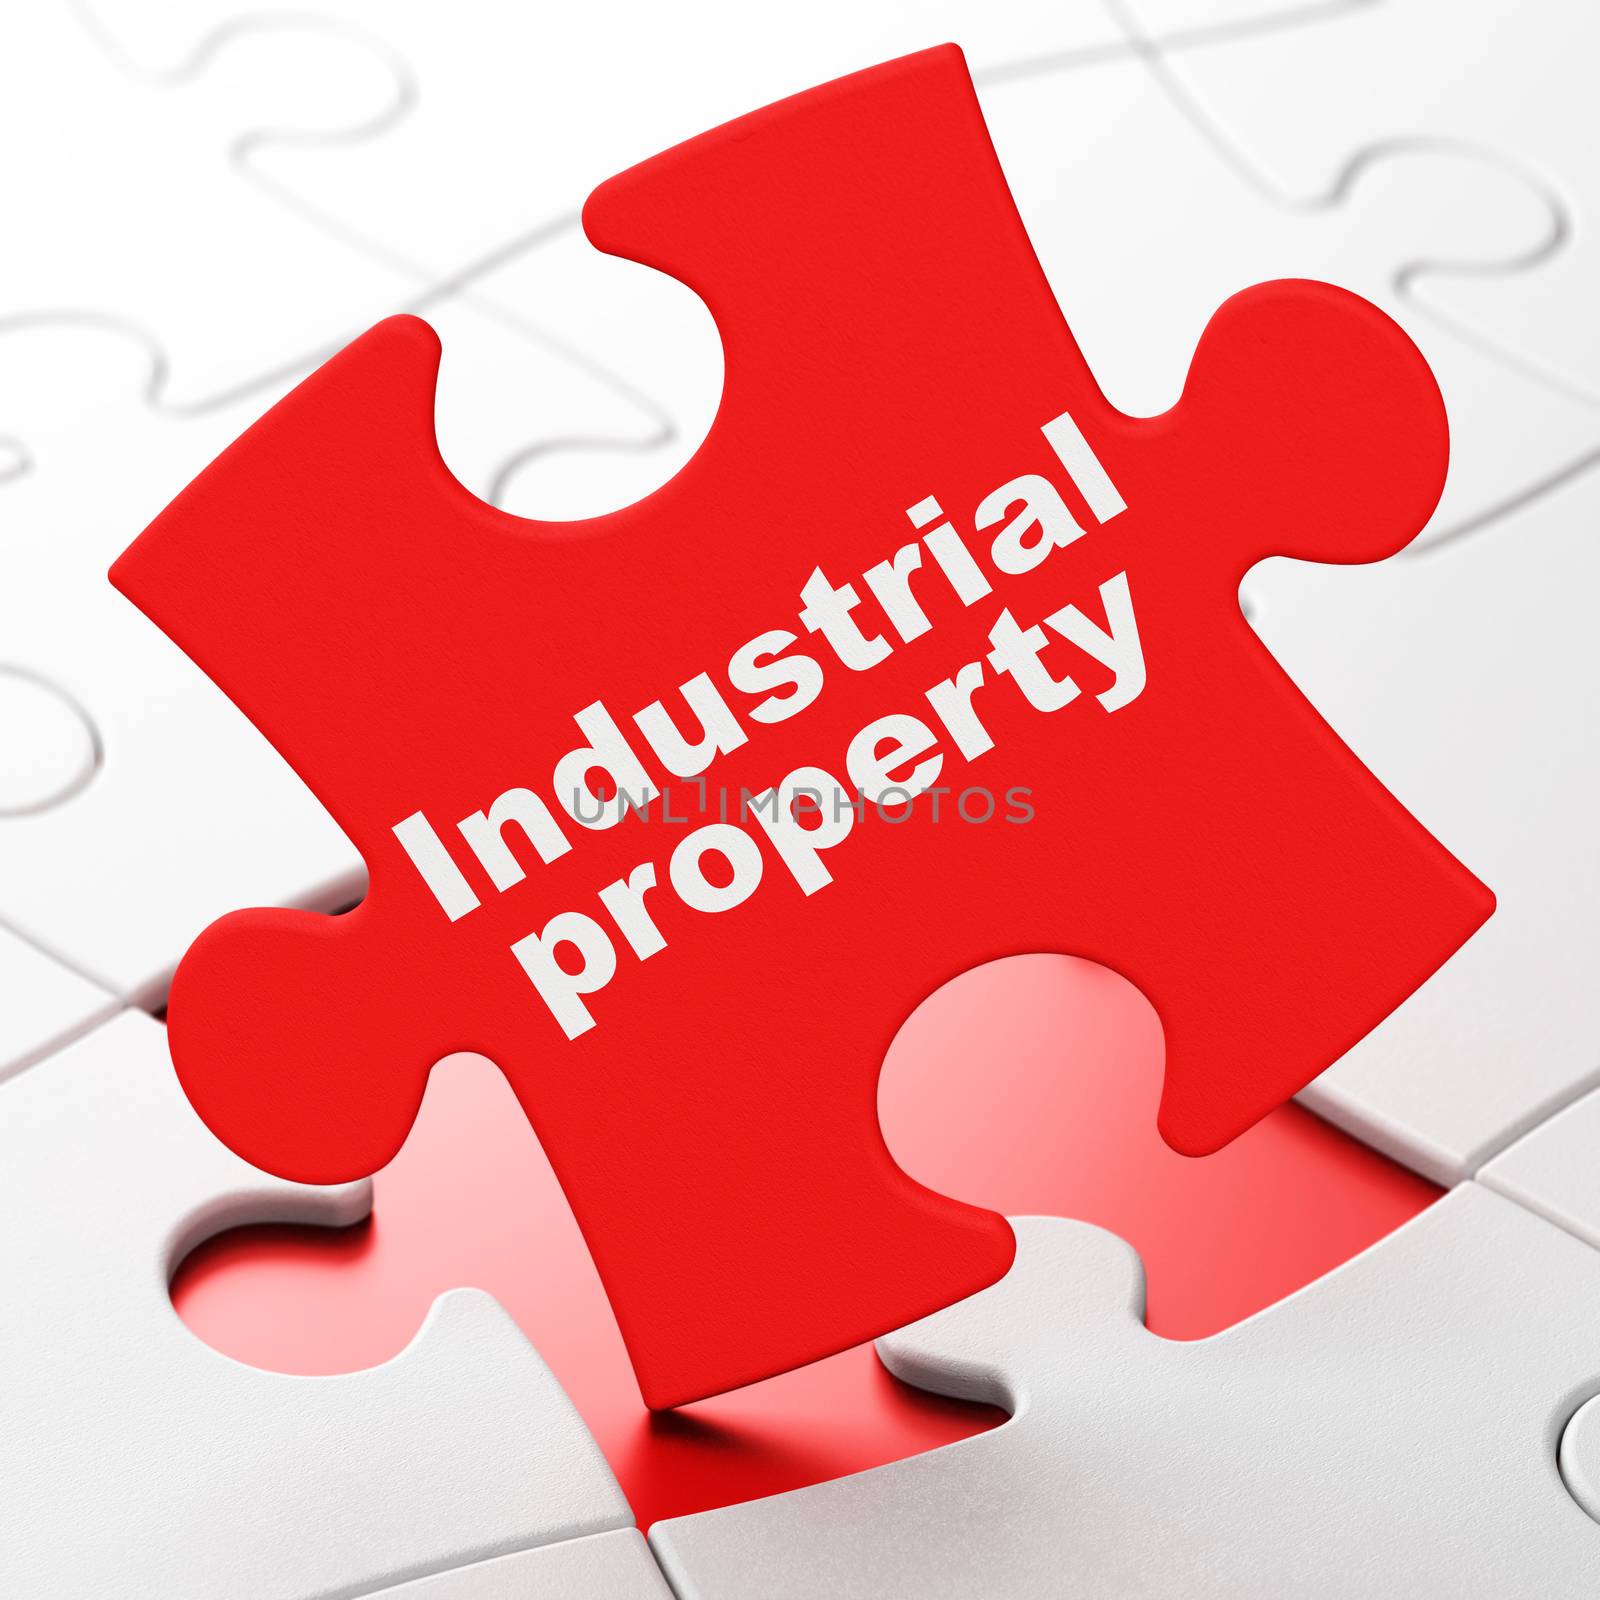 Law concept: Industrial Property on Red puzzle pieces background, 3d render